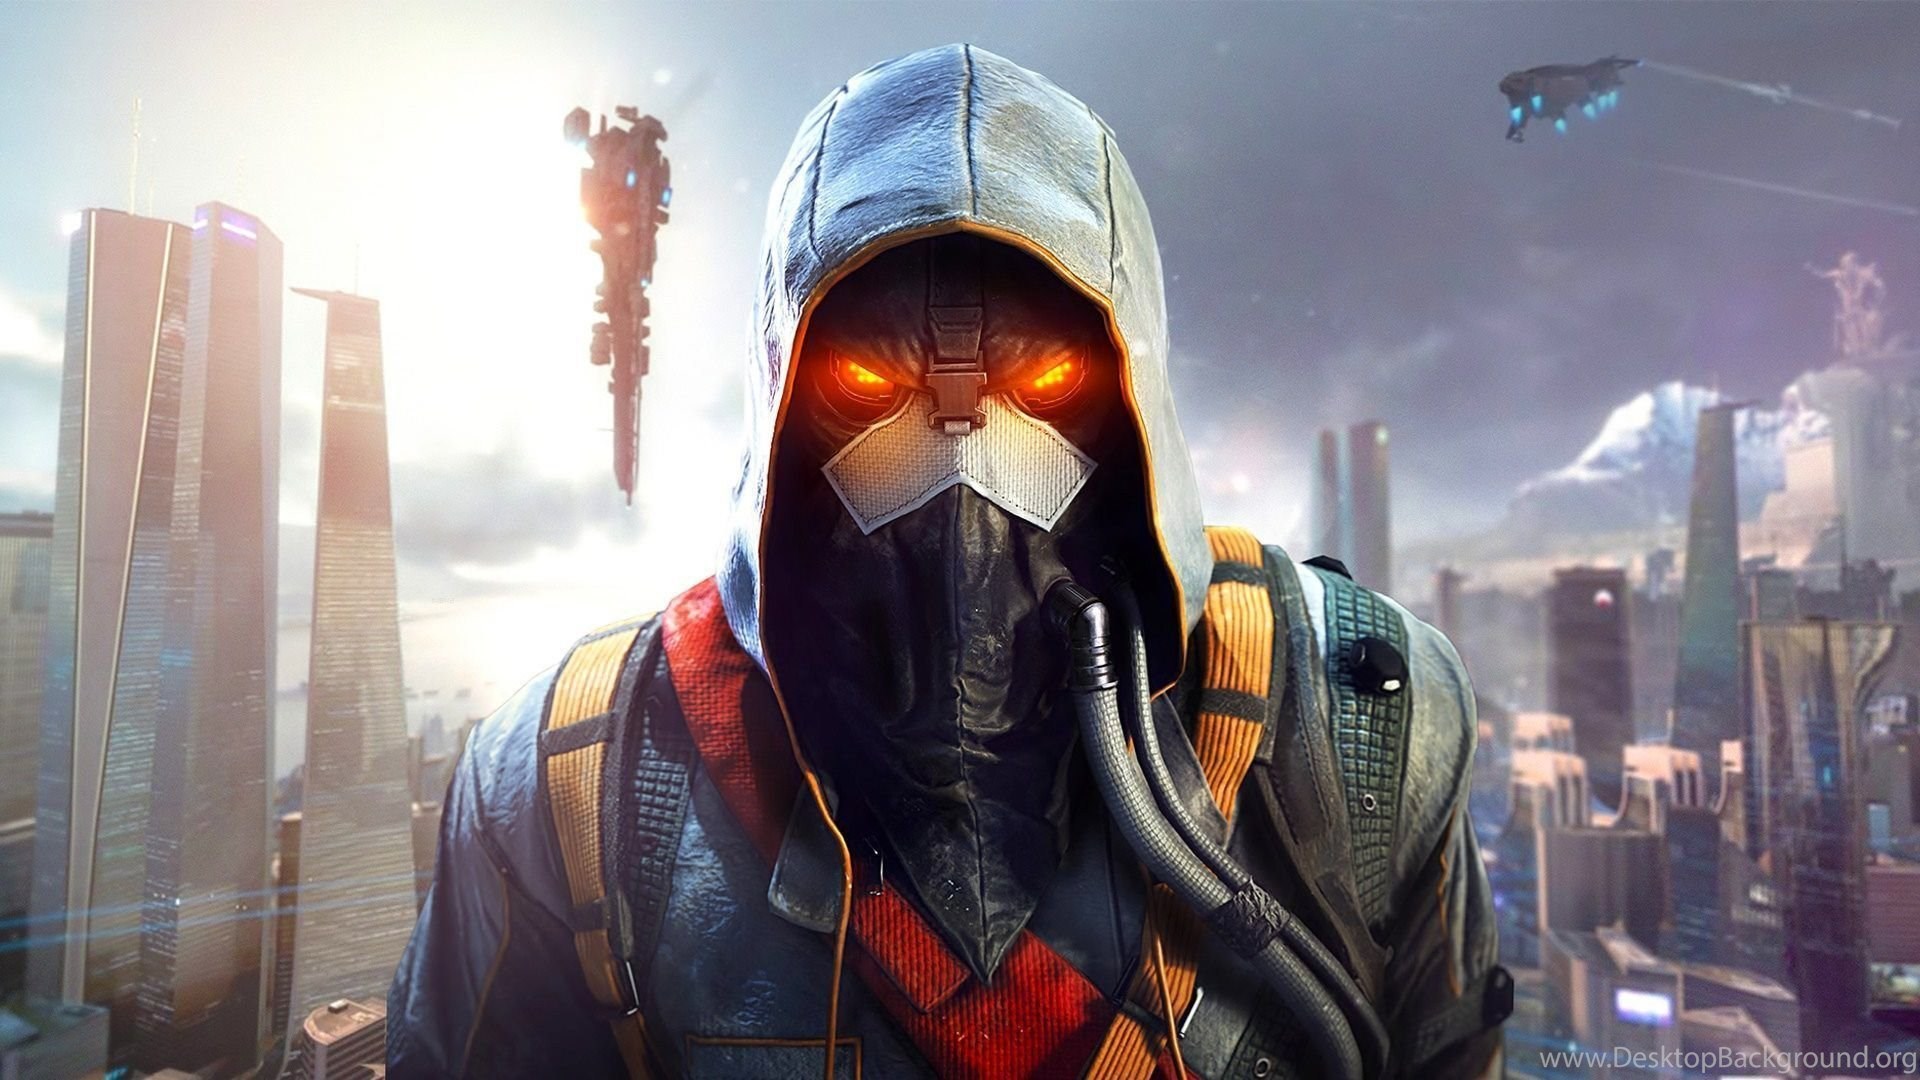 42 Killzone Shadow Fall Hd Wallpapers Desktop Background Images, Photos, Reviews